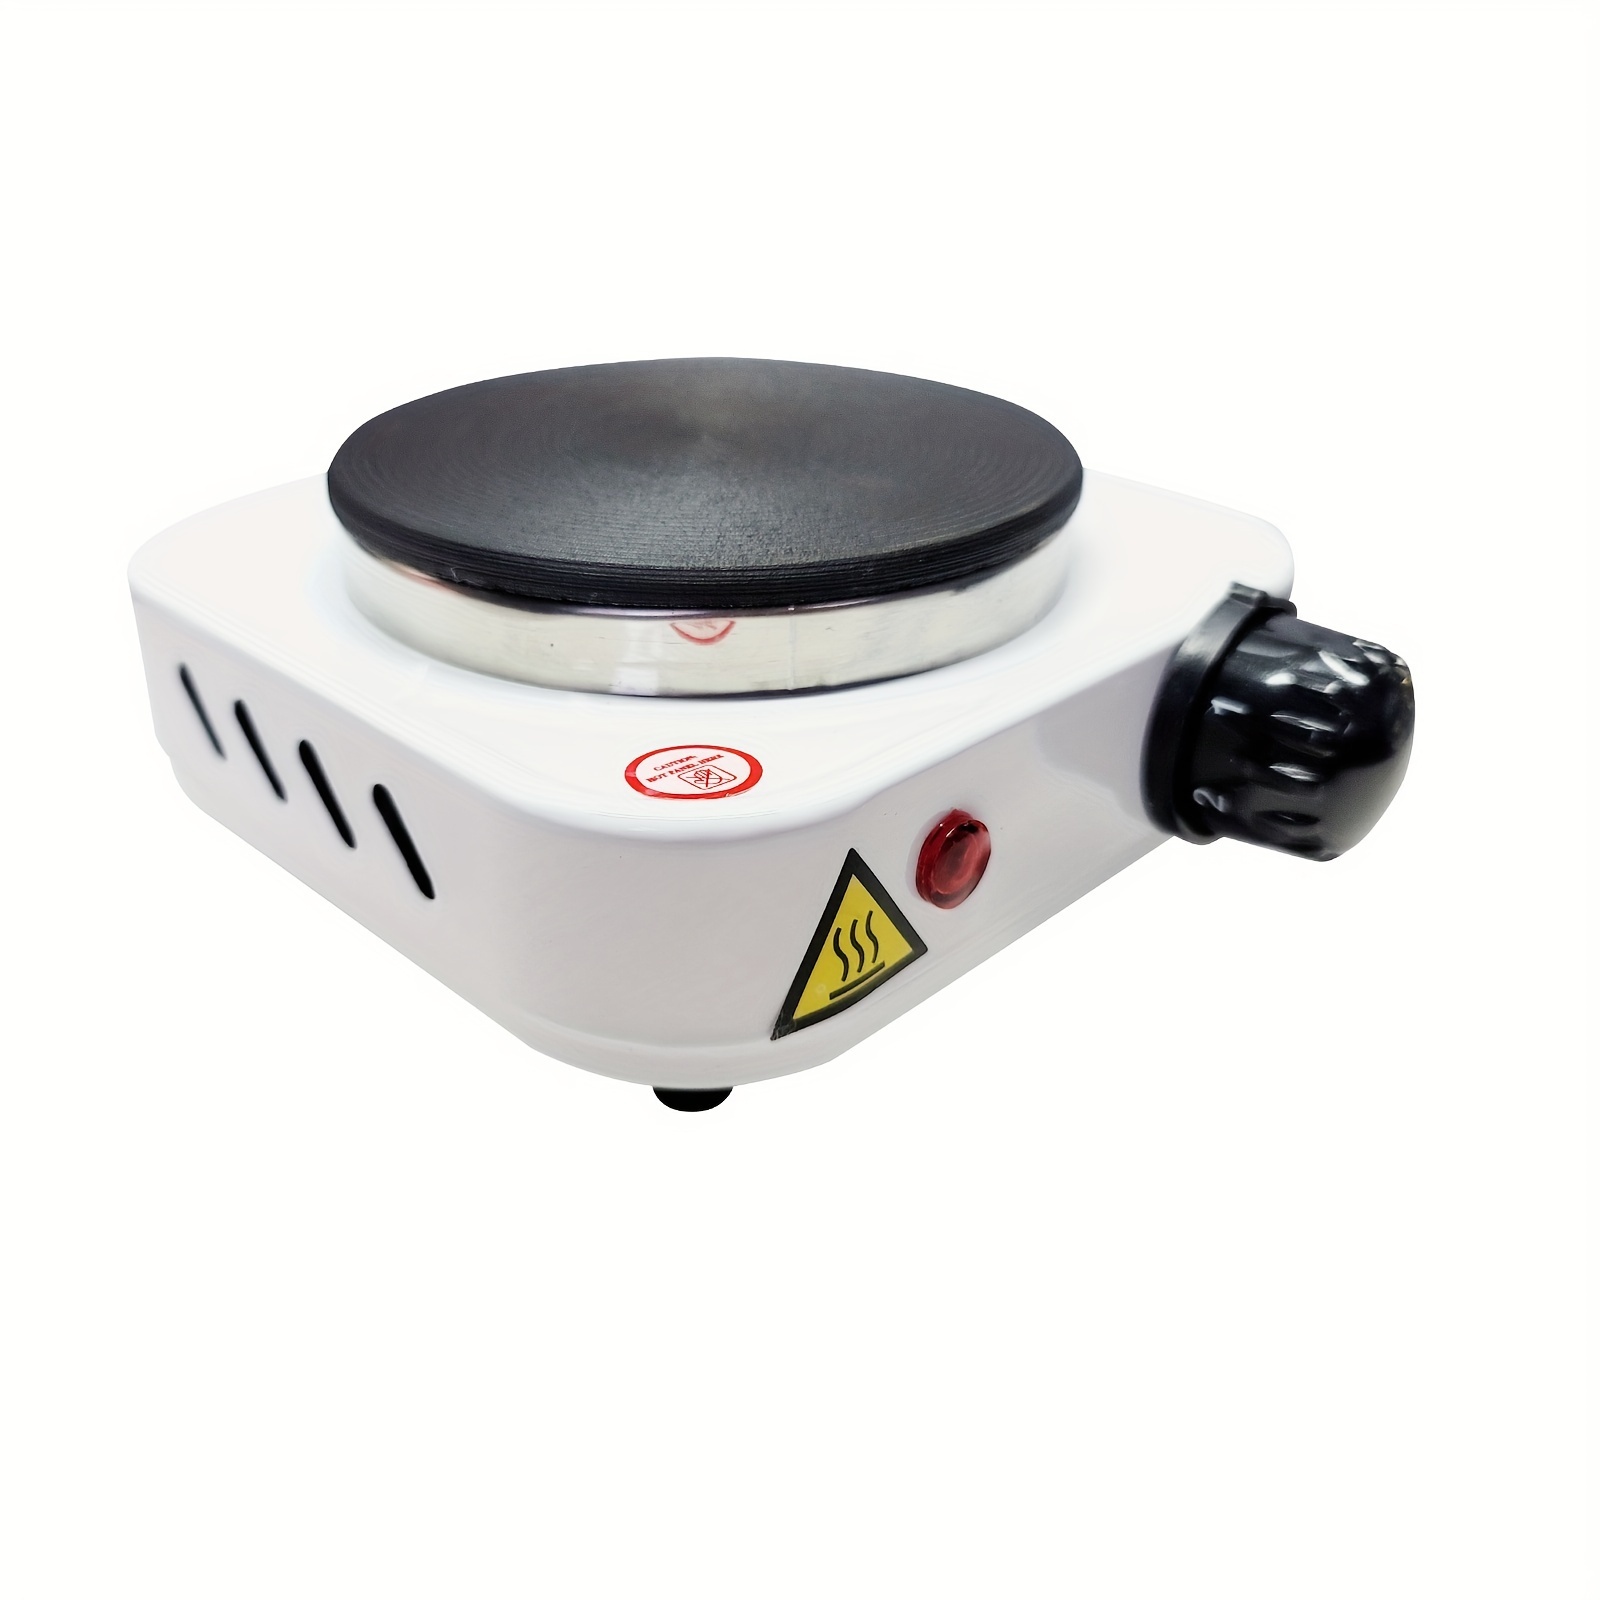 Multifunctional Electric Heating Plate for Melting Wax,Candle